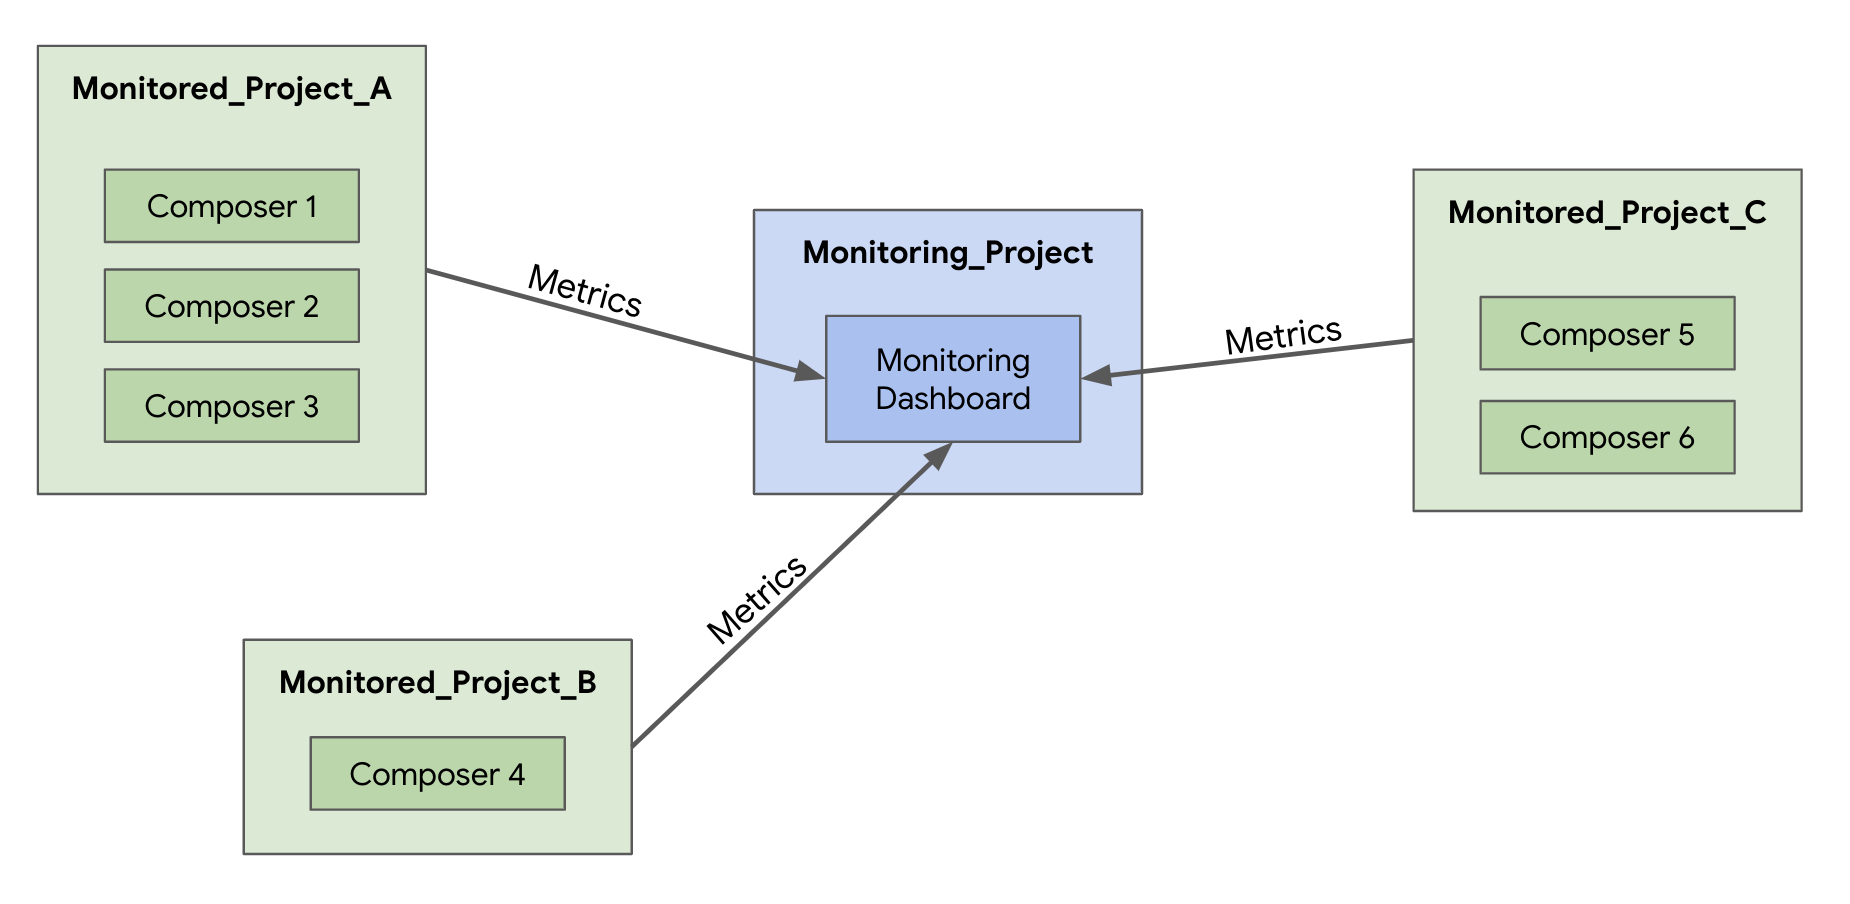 Diagram that shows the monitoring project, which contains the monitoring dashboard, and three monitored projects that each contain composer environments. Each monitored project has an arrow pointing to the monitored project labeled 'metrics'